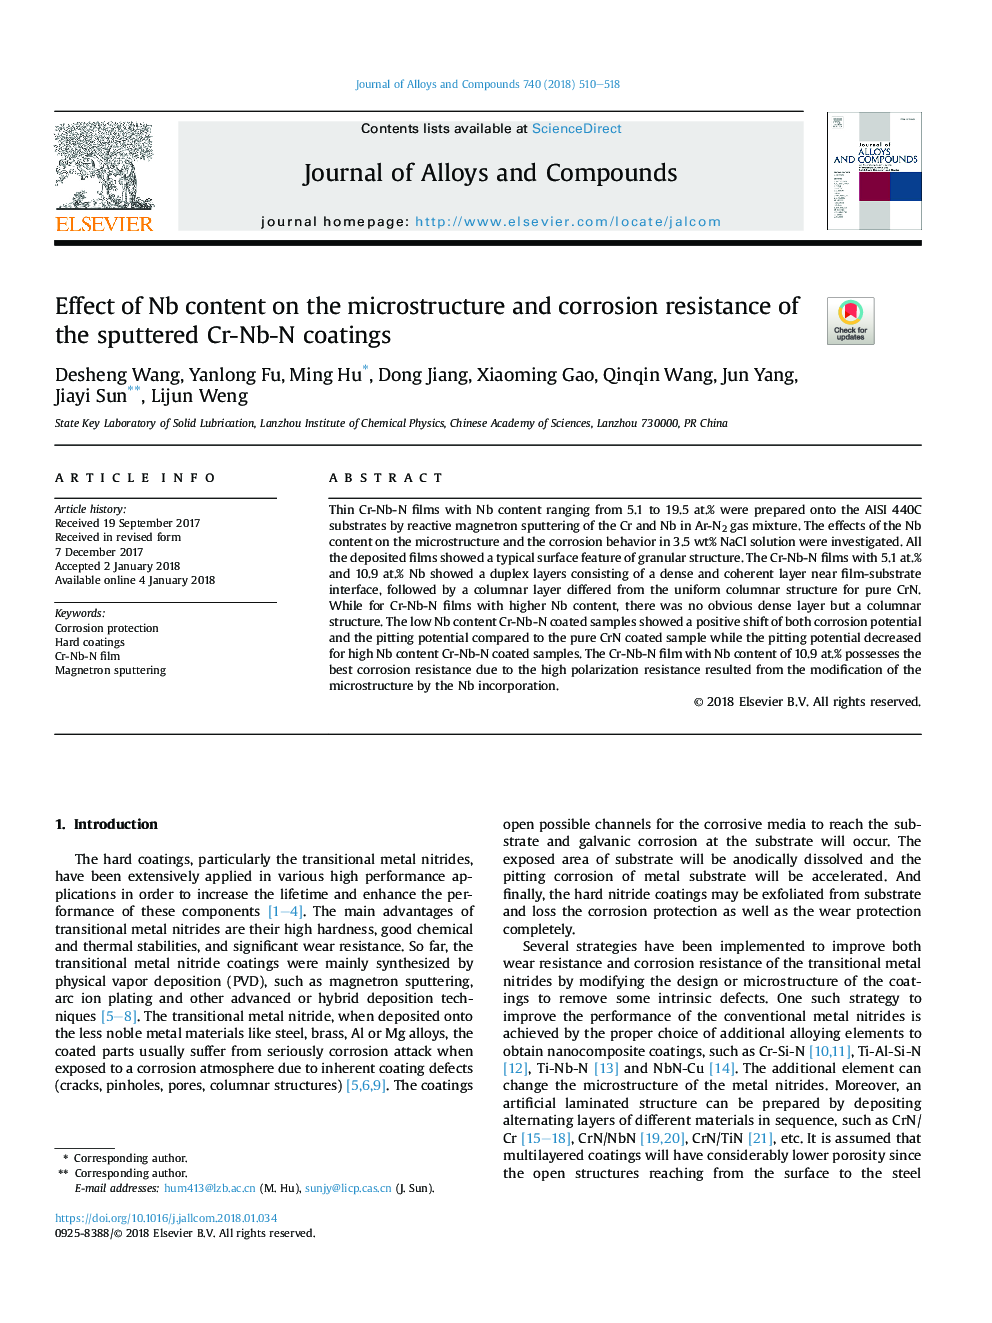 Effect of Nb content on the microstructure and corrosion resistance of the sputtered Cr-Nb-N coatings